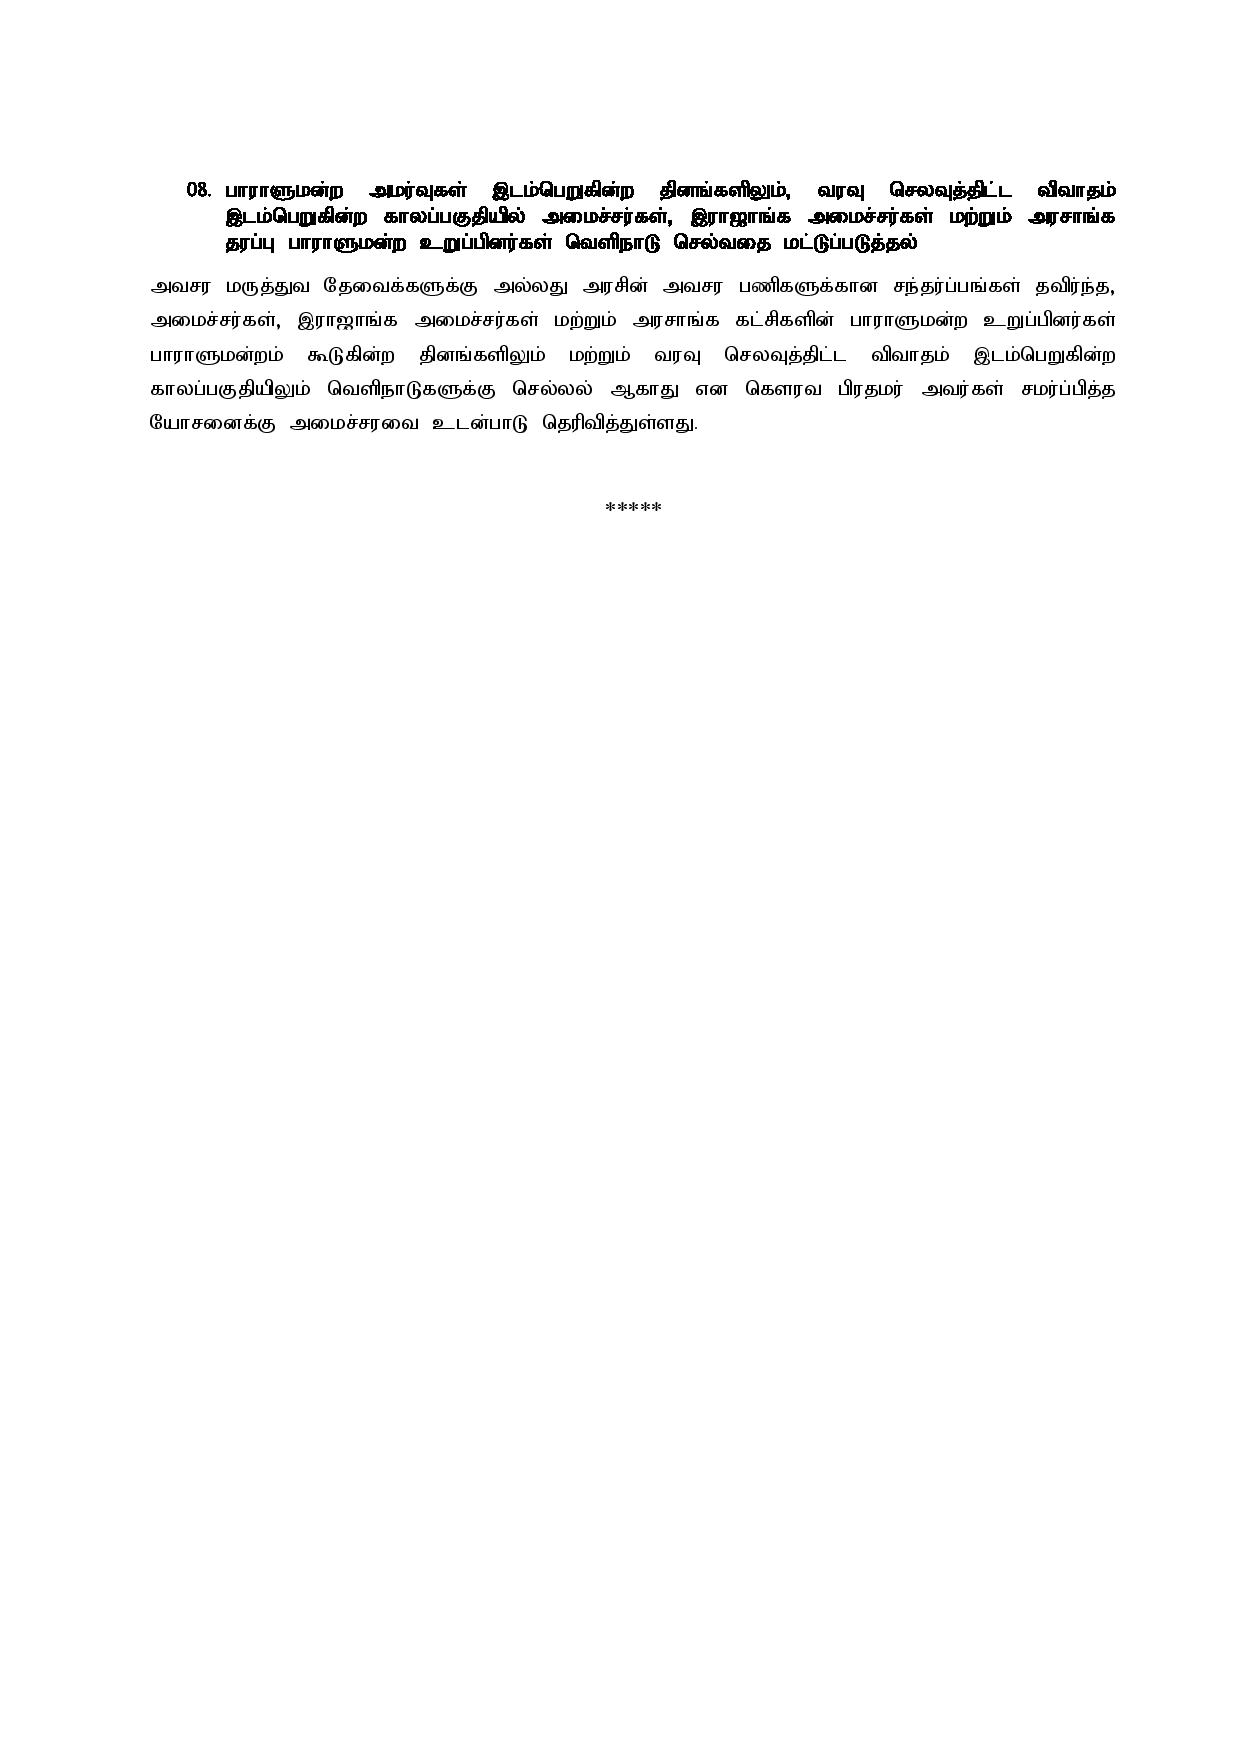 Cabinet Decisions on 31.10.2022 Tamil page 003